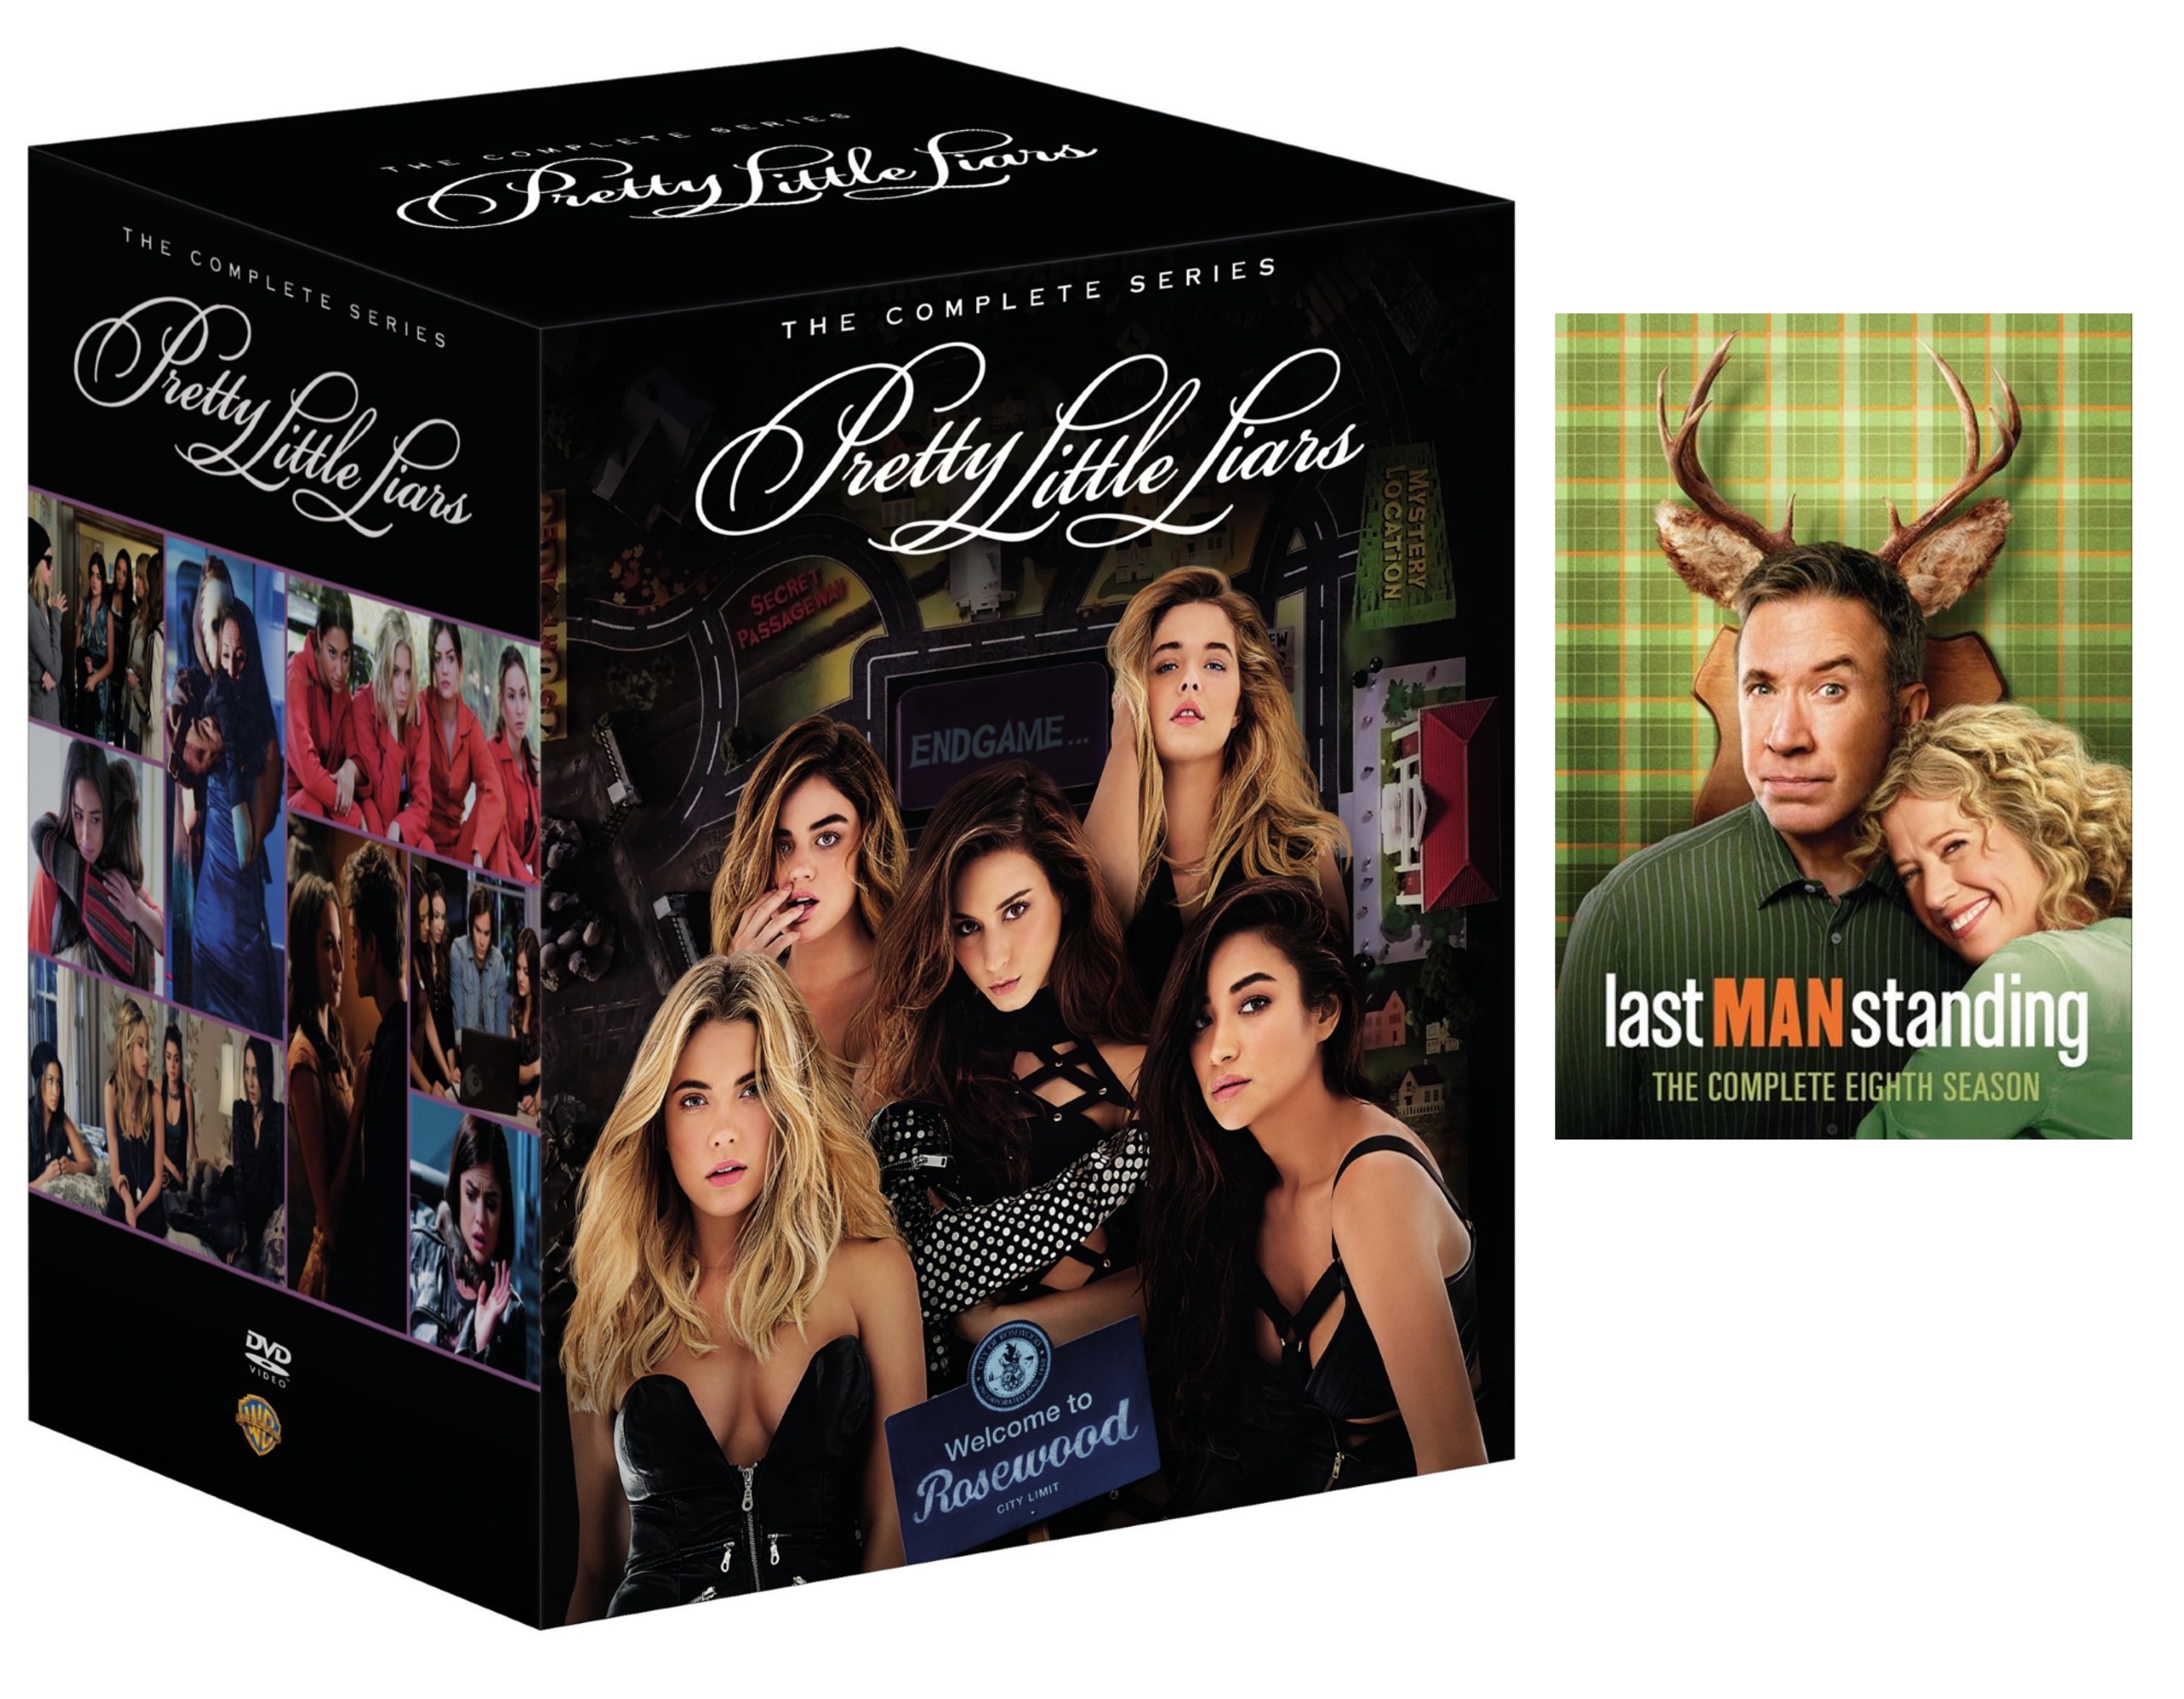 Pretty Little Liars: The Complete Series [DVD] - Best Buy